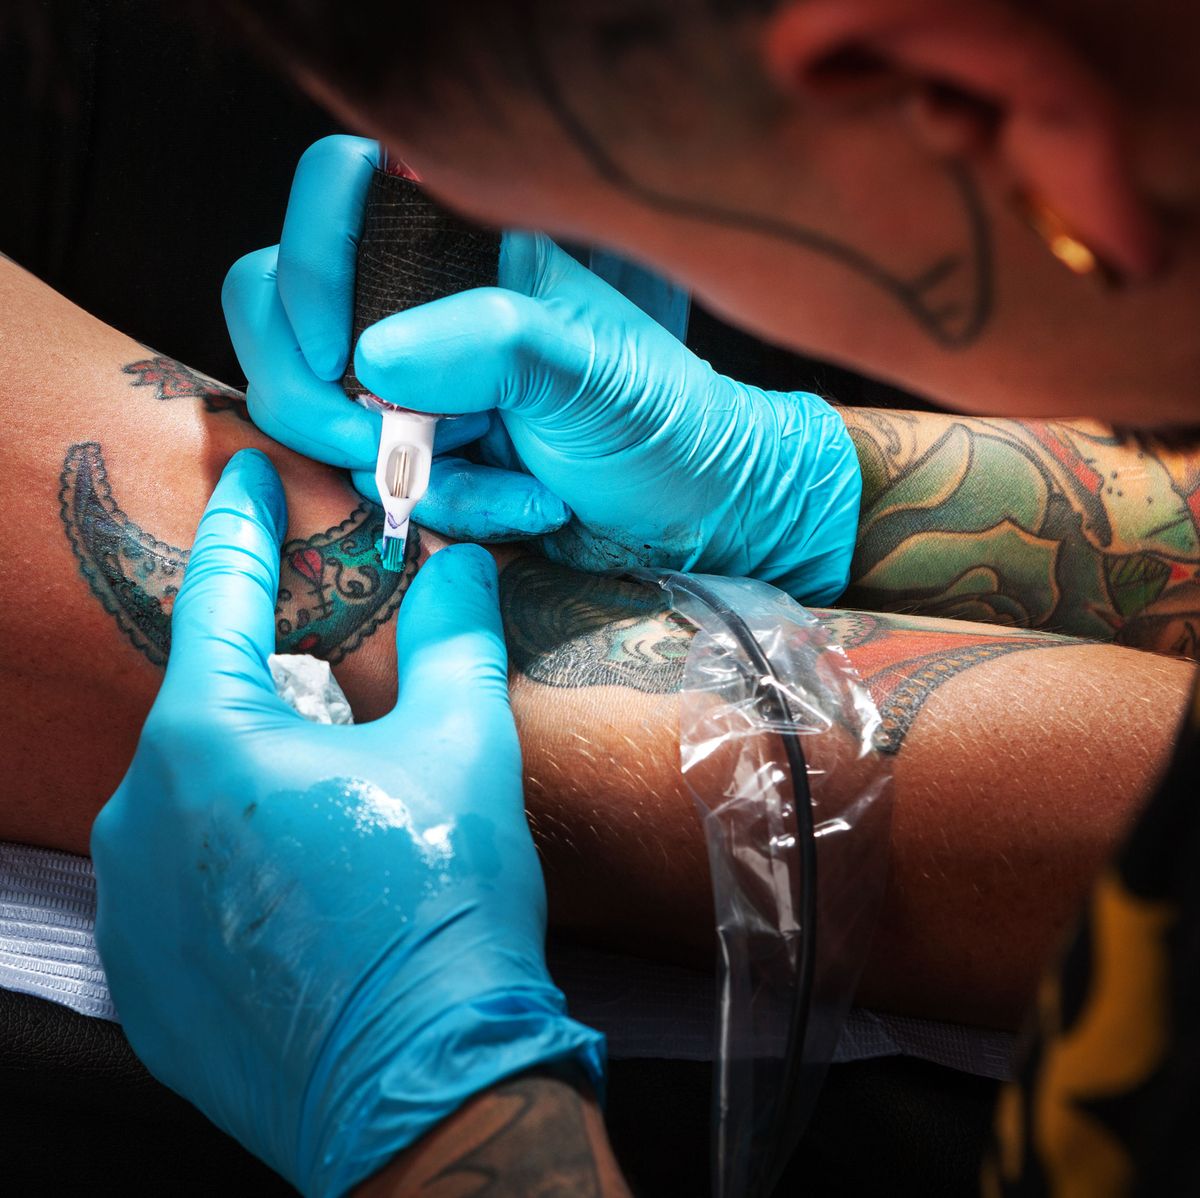 Infected Tattoos: 5 Things to Look For After Getting Inked